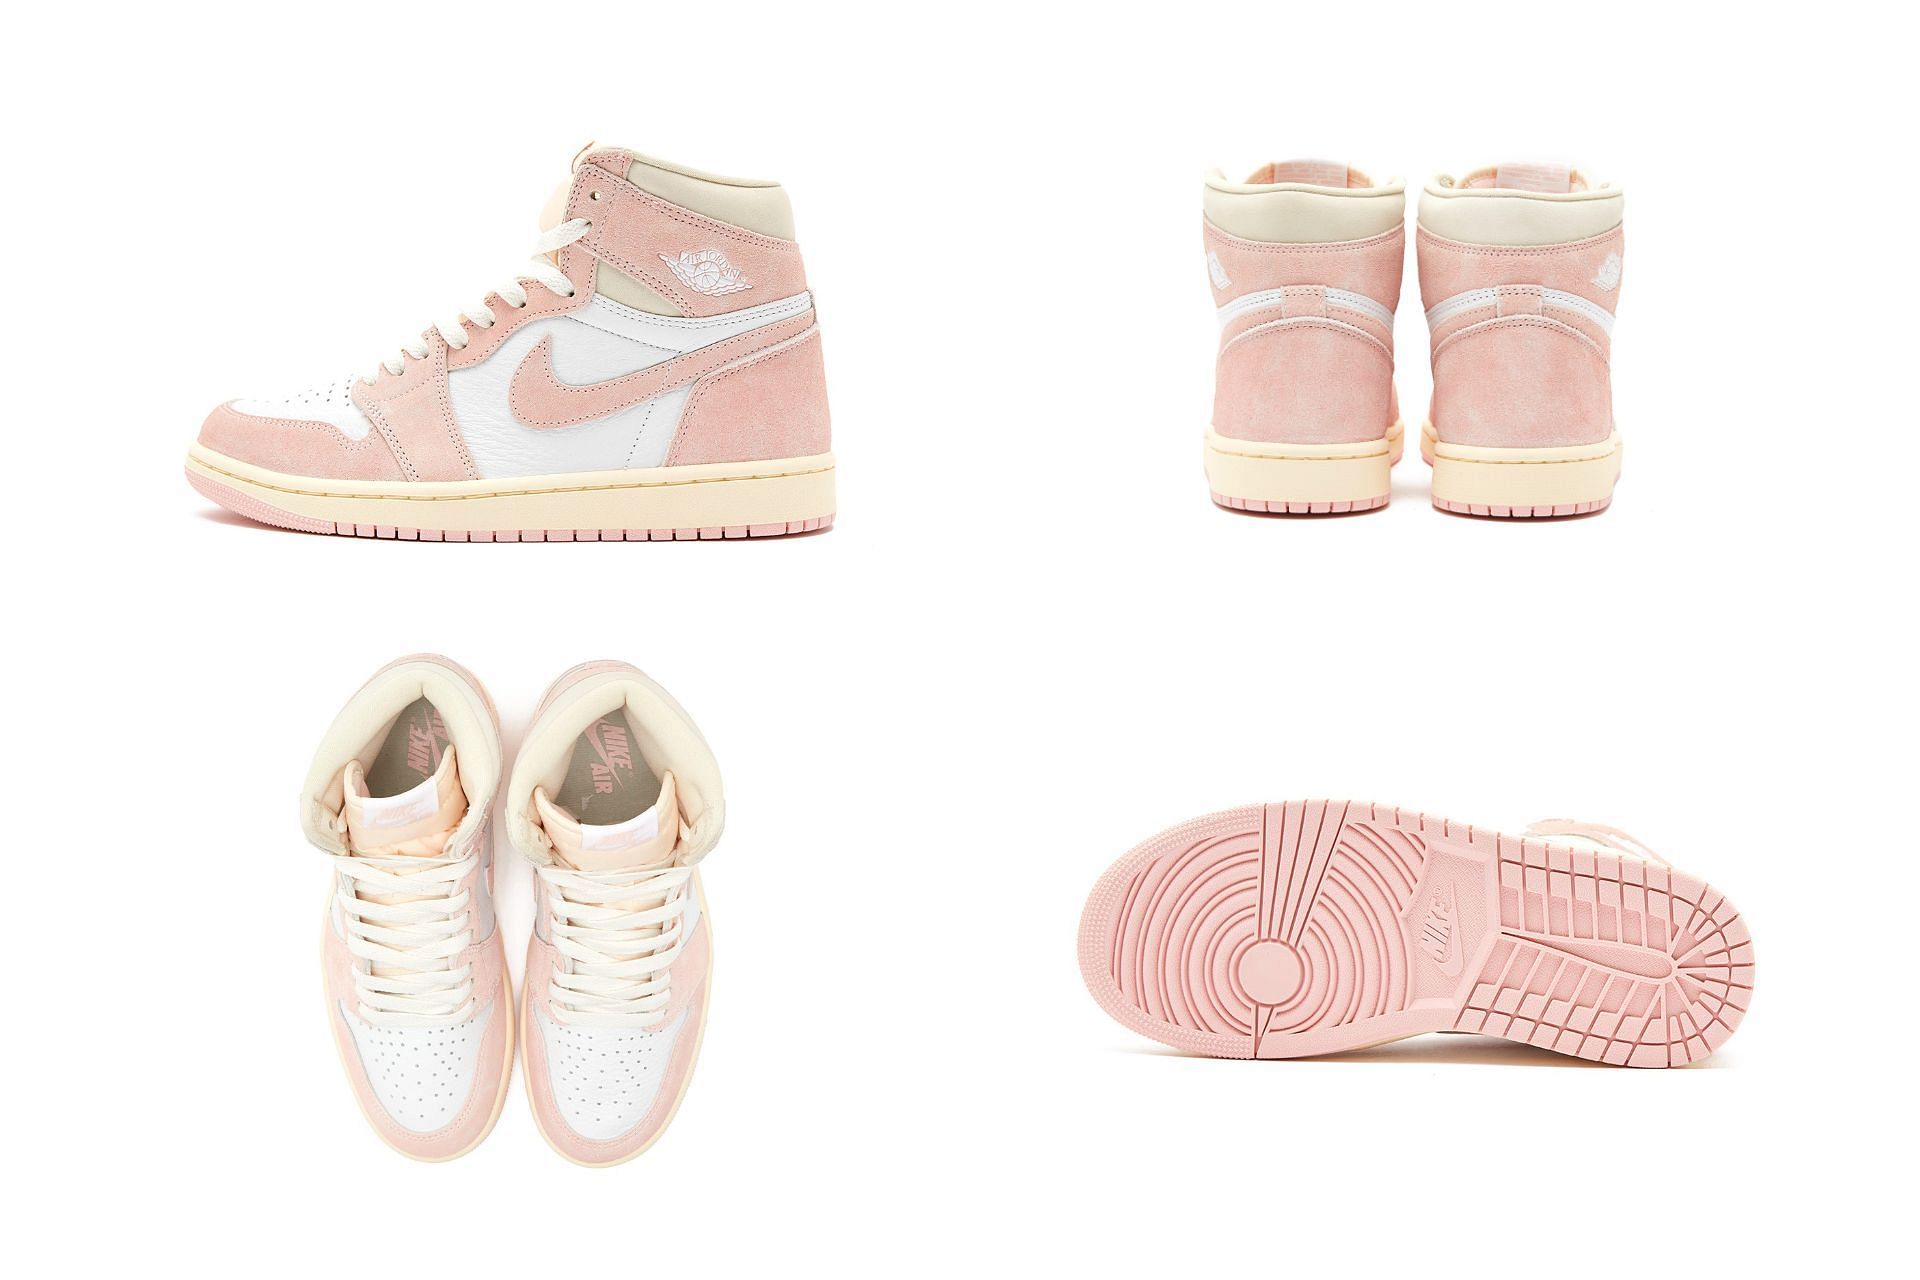 Nike Air Jordan 1 High OG "Washed Pink" sneakers are rumored to release